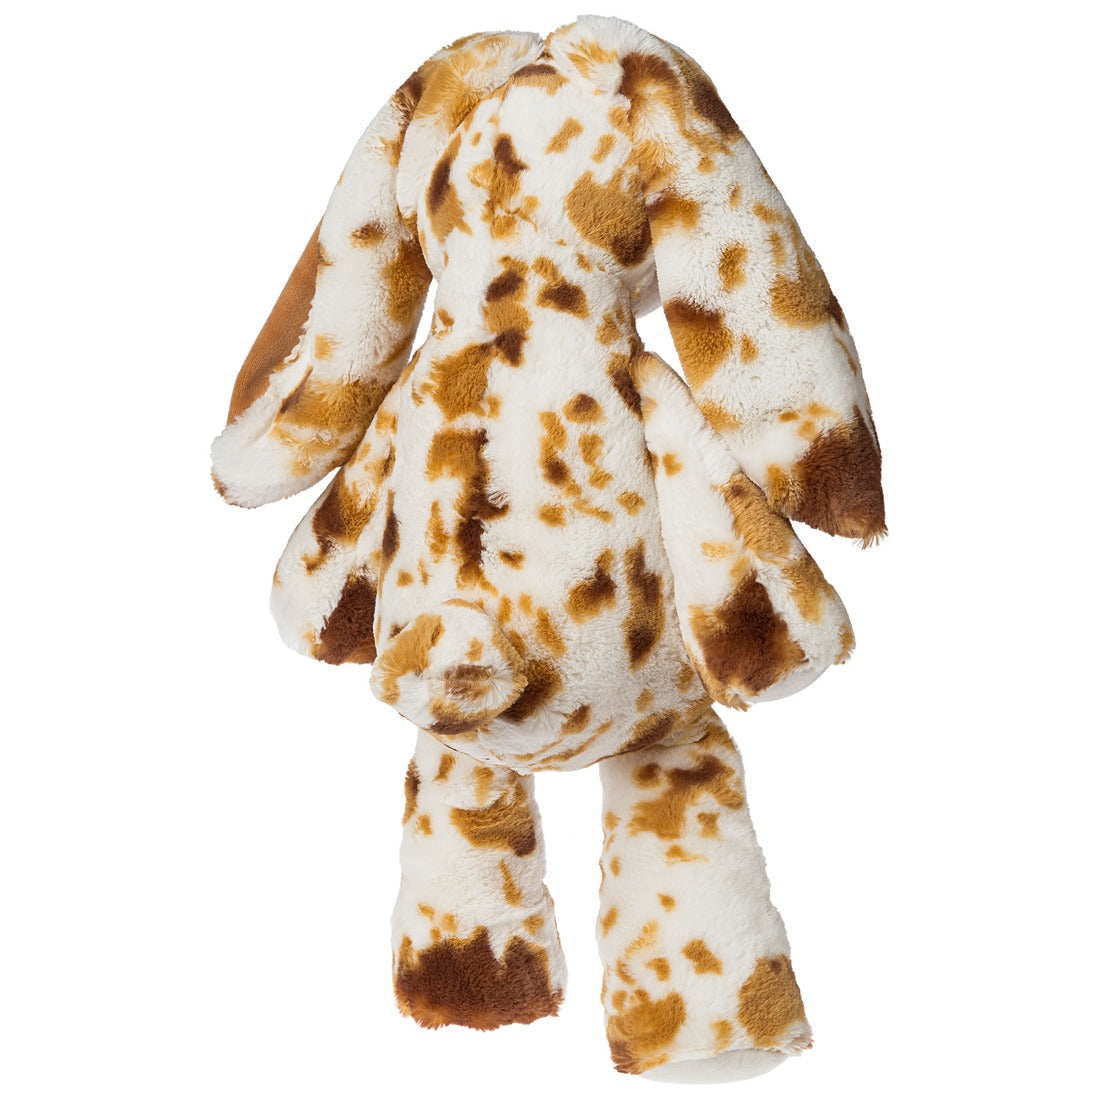 Mary Meyer - Marshmallow Big S’mores Bunny 19”